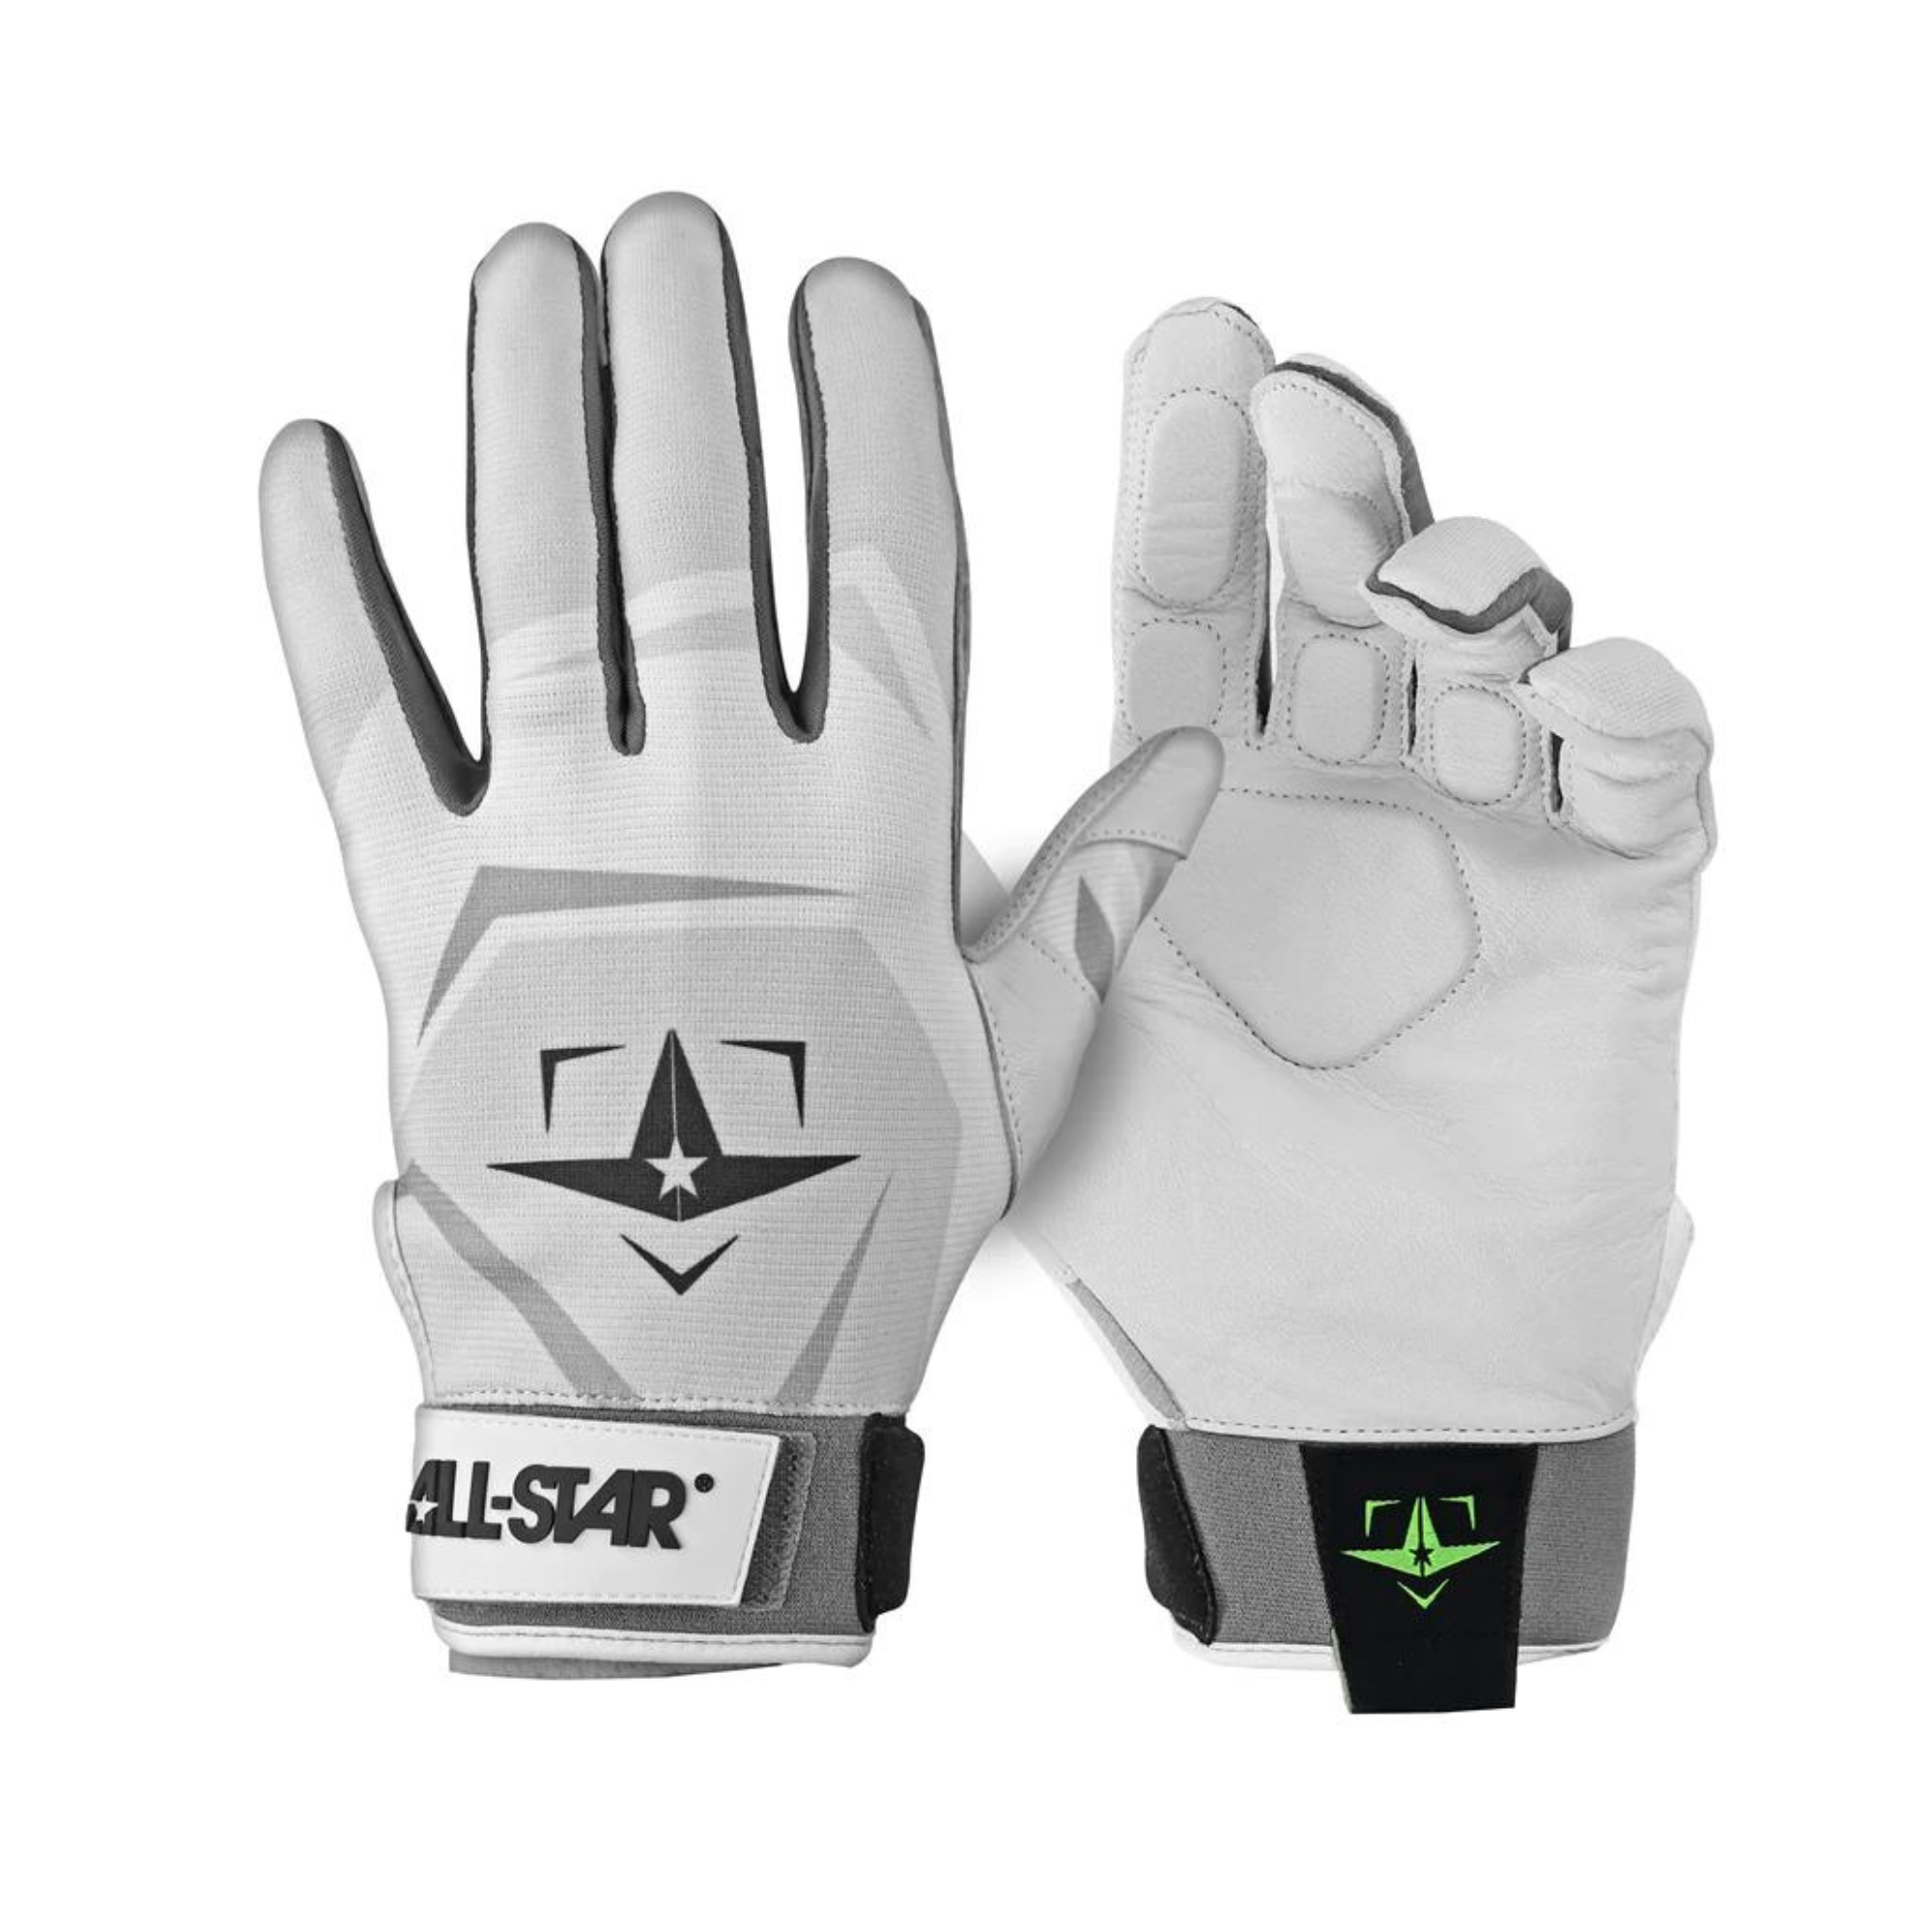 All-Star Youth Protective Padded Catcher's Inner Glove RHT